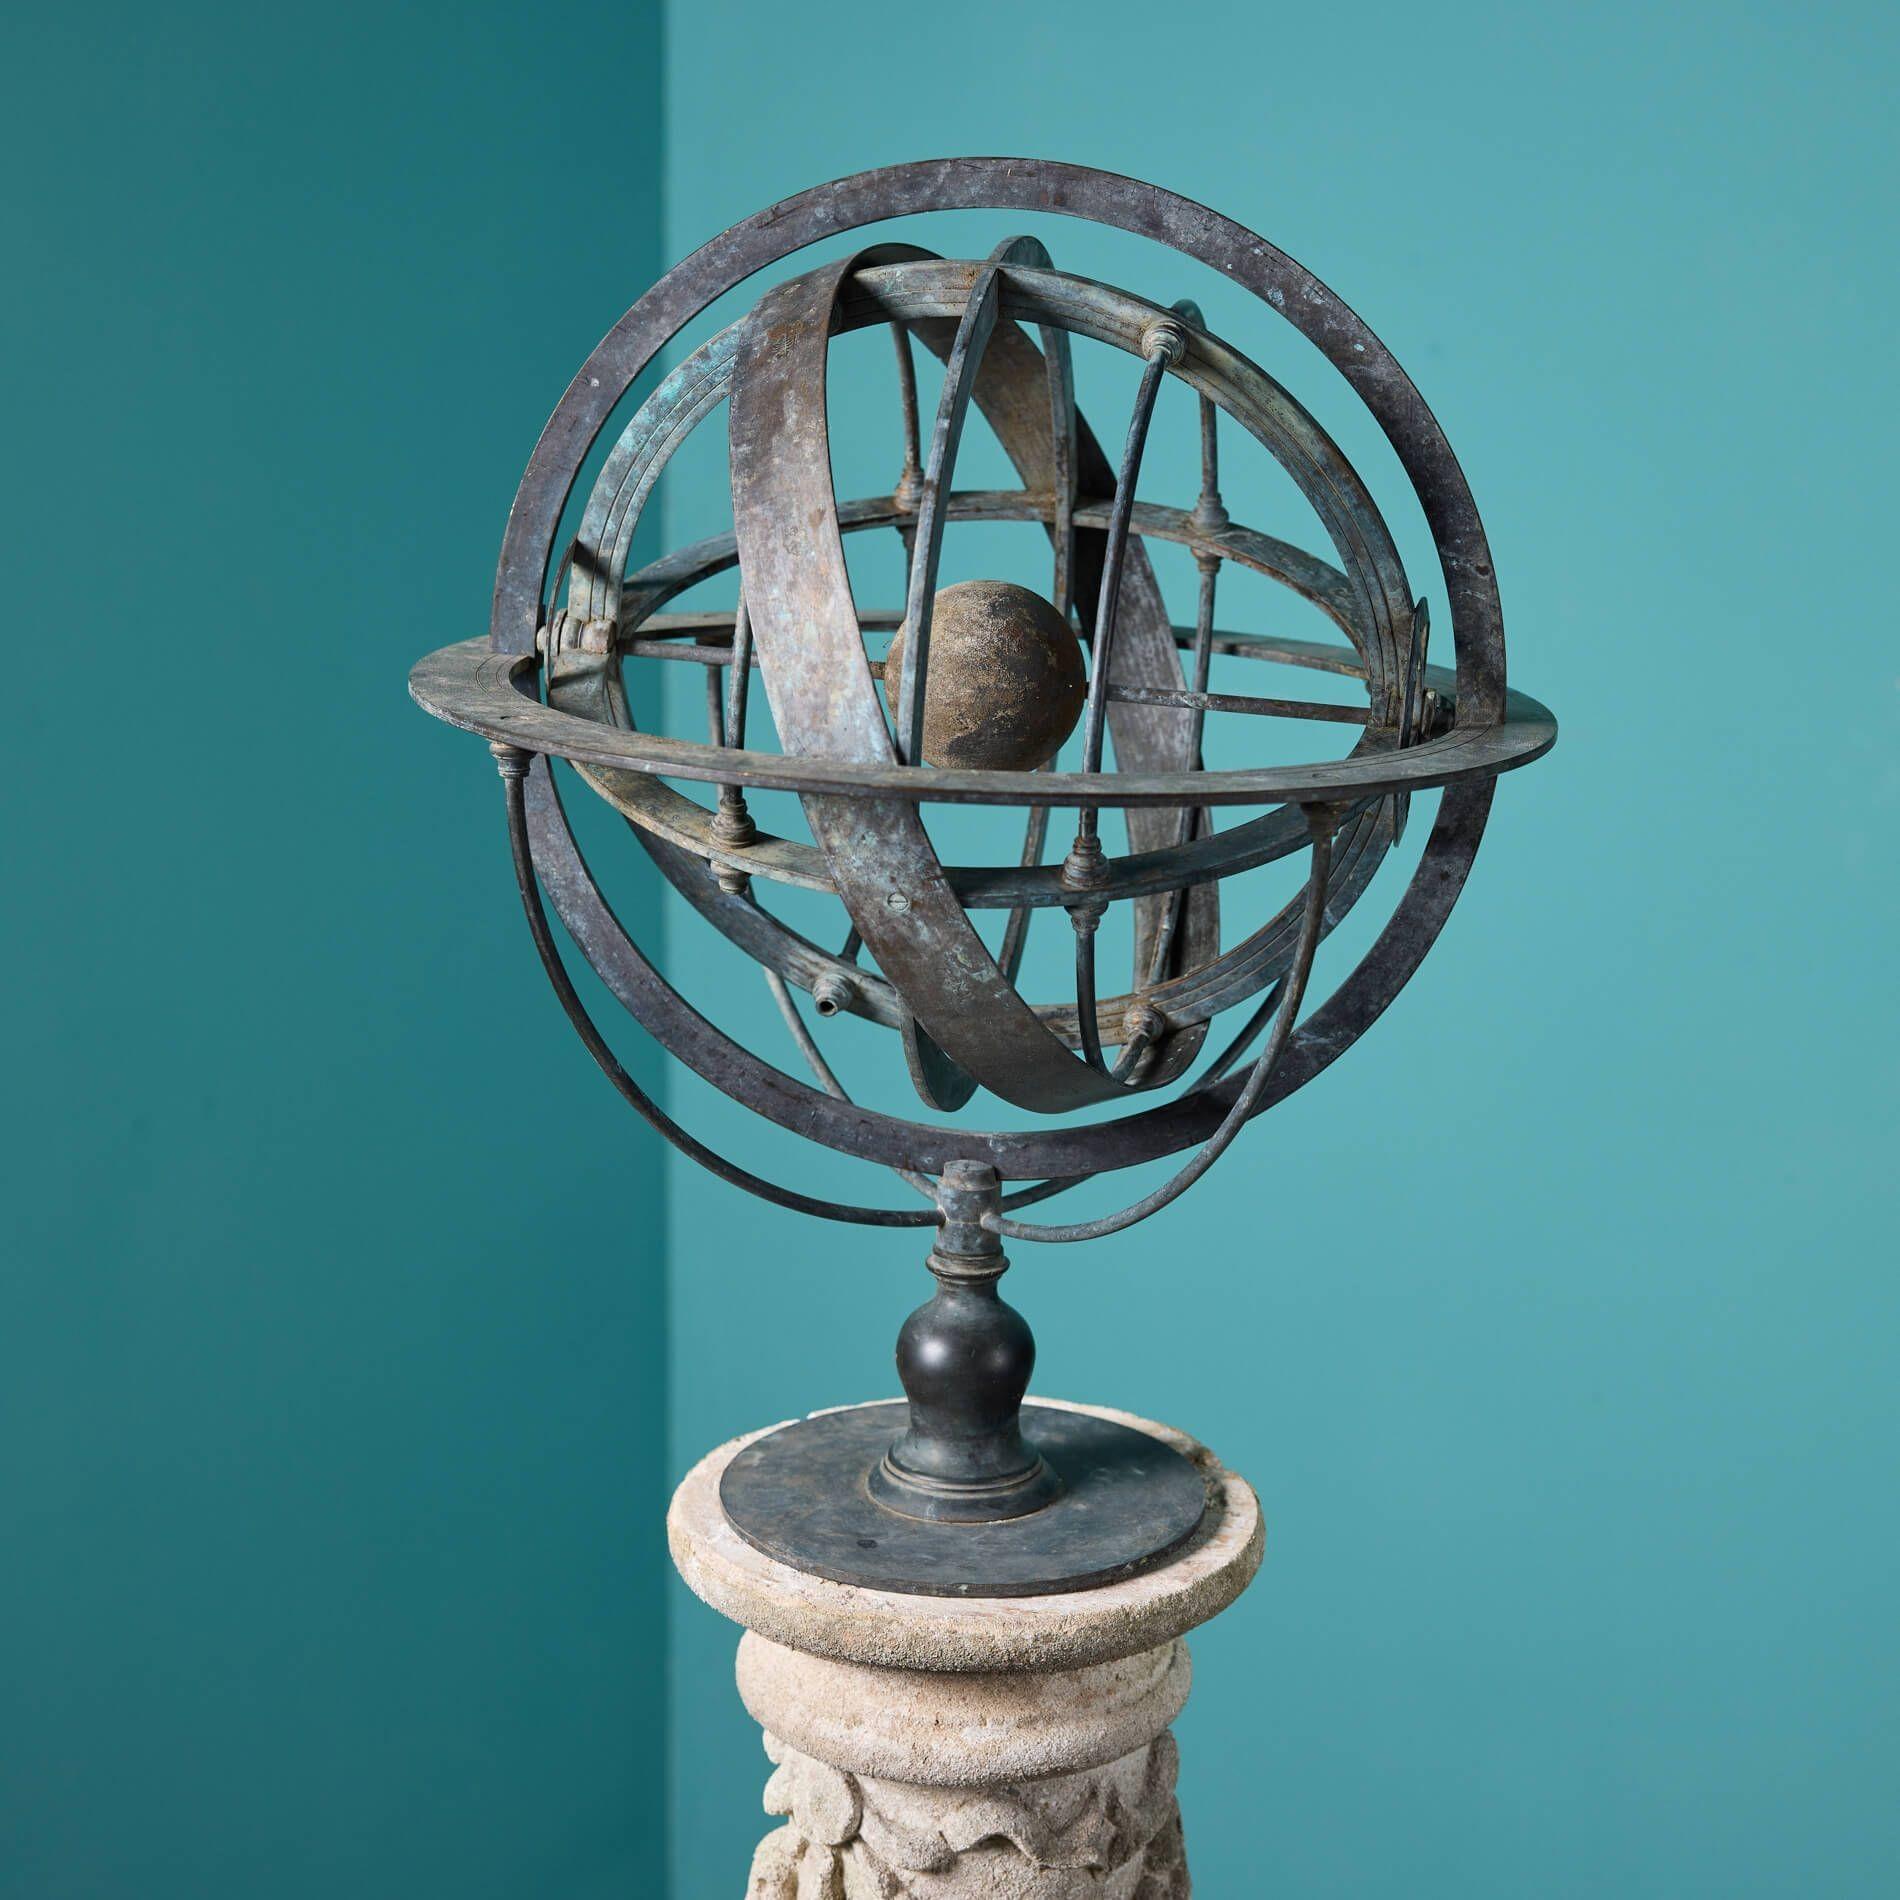 Cast in bronze, this armillary sundial sits upon a limestone pedestal in the neoclassical style. It is a beautiful addition to a country garden where it might be situated among flowerbeds or at the centre of a large courtyard. As opposed to the